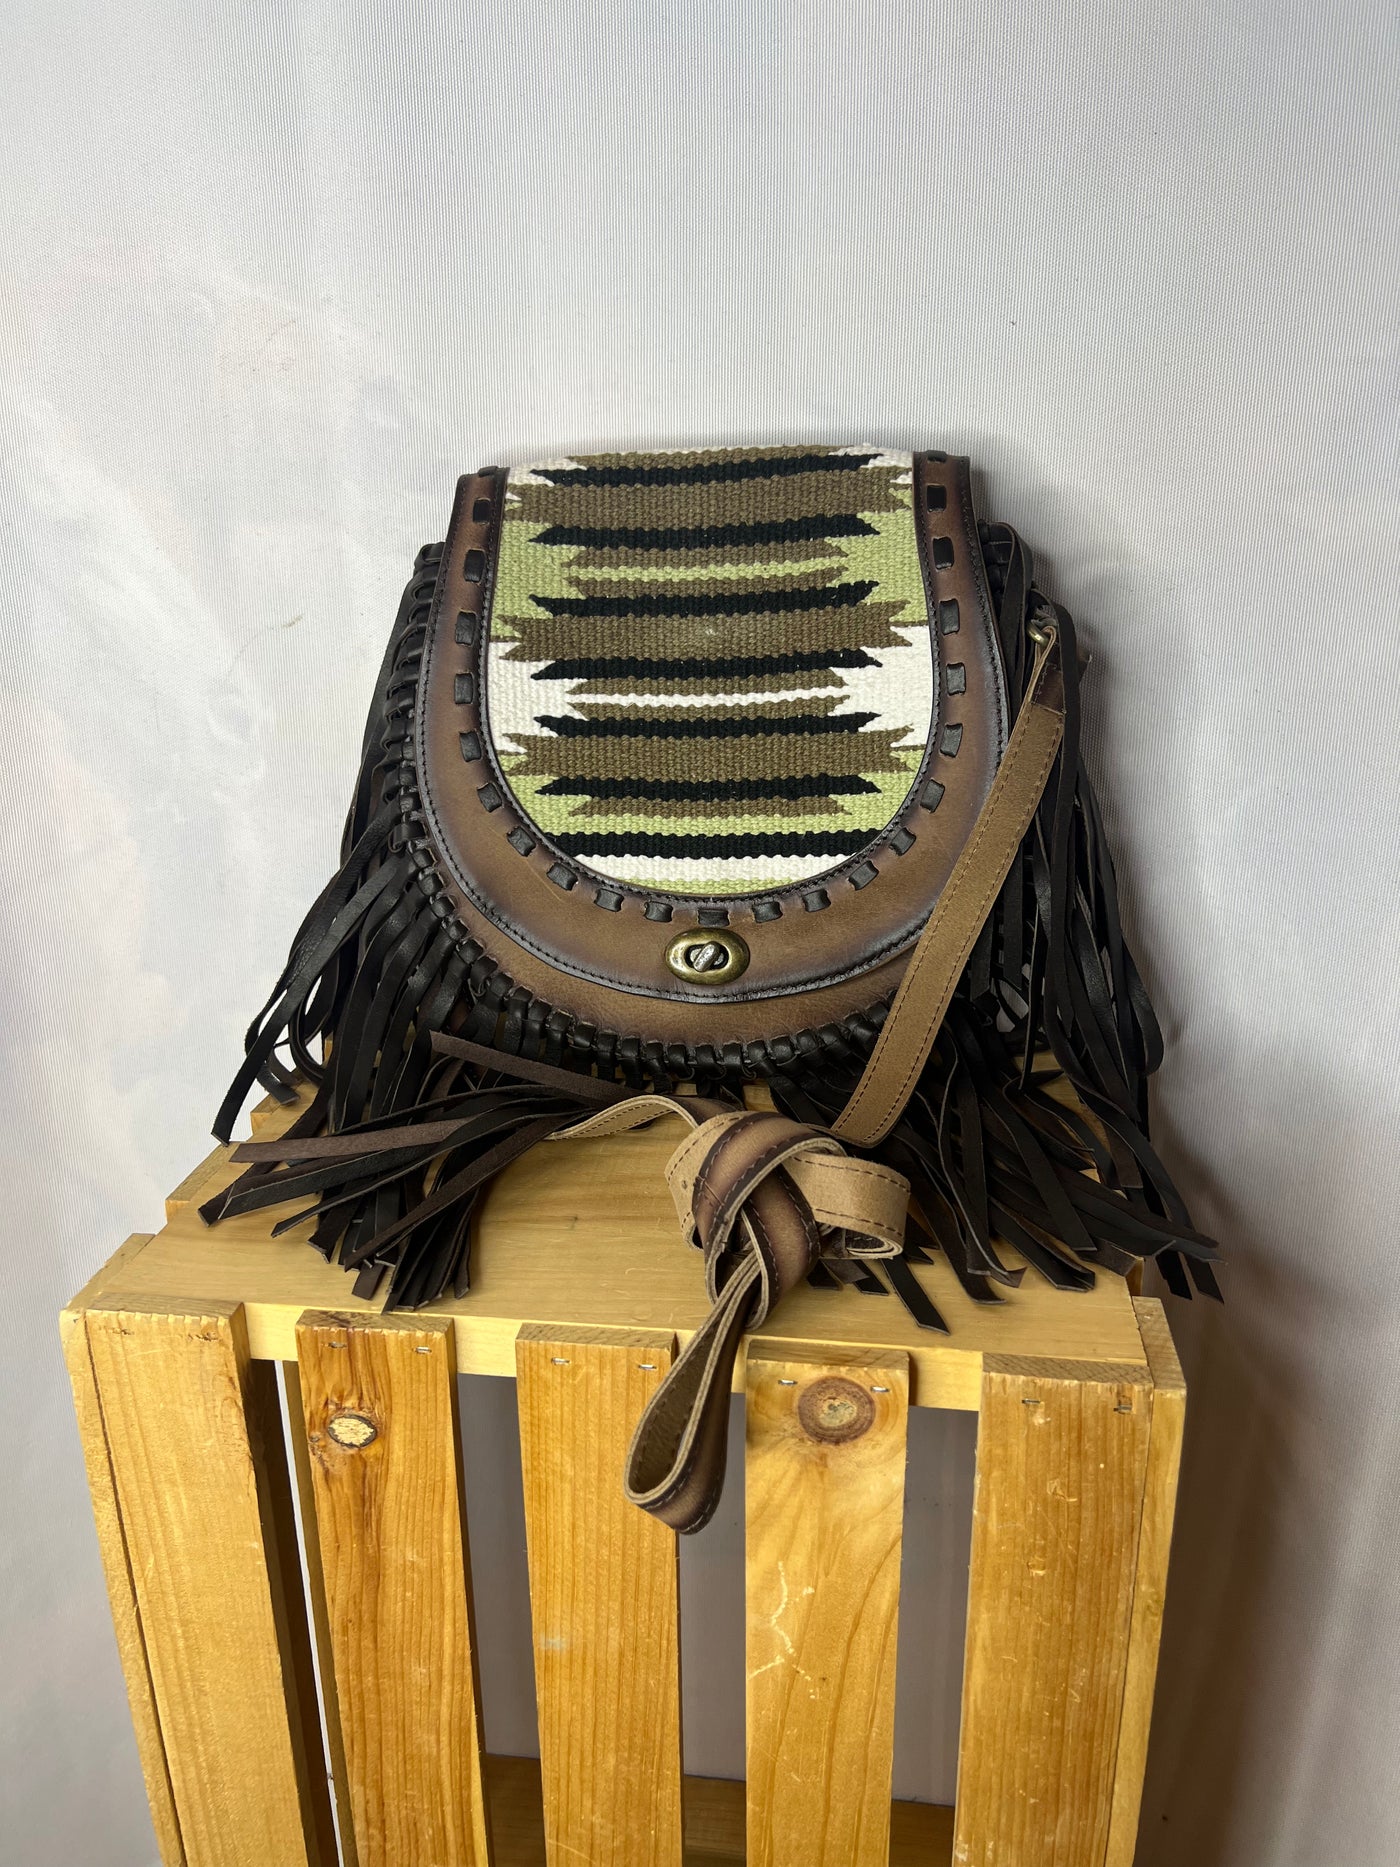 Rafter T Chocolate Leather with Grn/Brn/Blk Serape & Fringe Purse